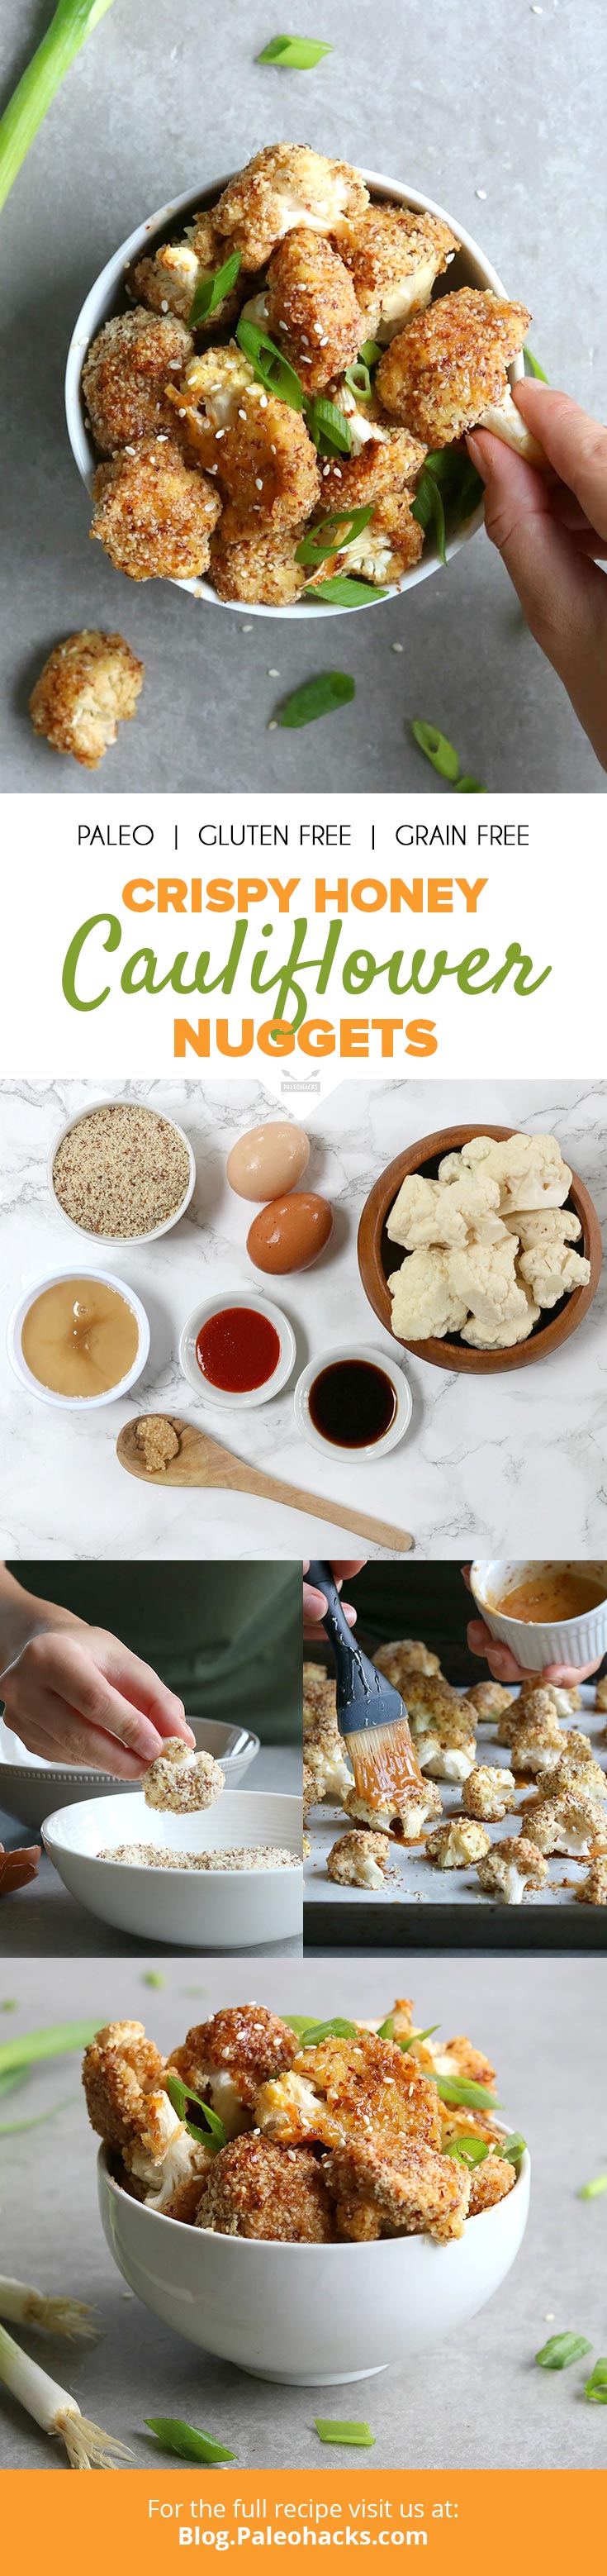 These sweet and sticky cauliflower nuggets are coated in almond meal and smothered in a raw honey garlic sauce for a dish that satisfies.